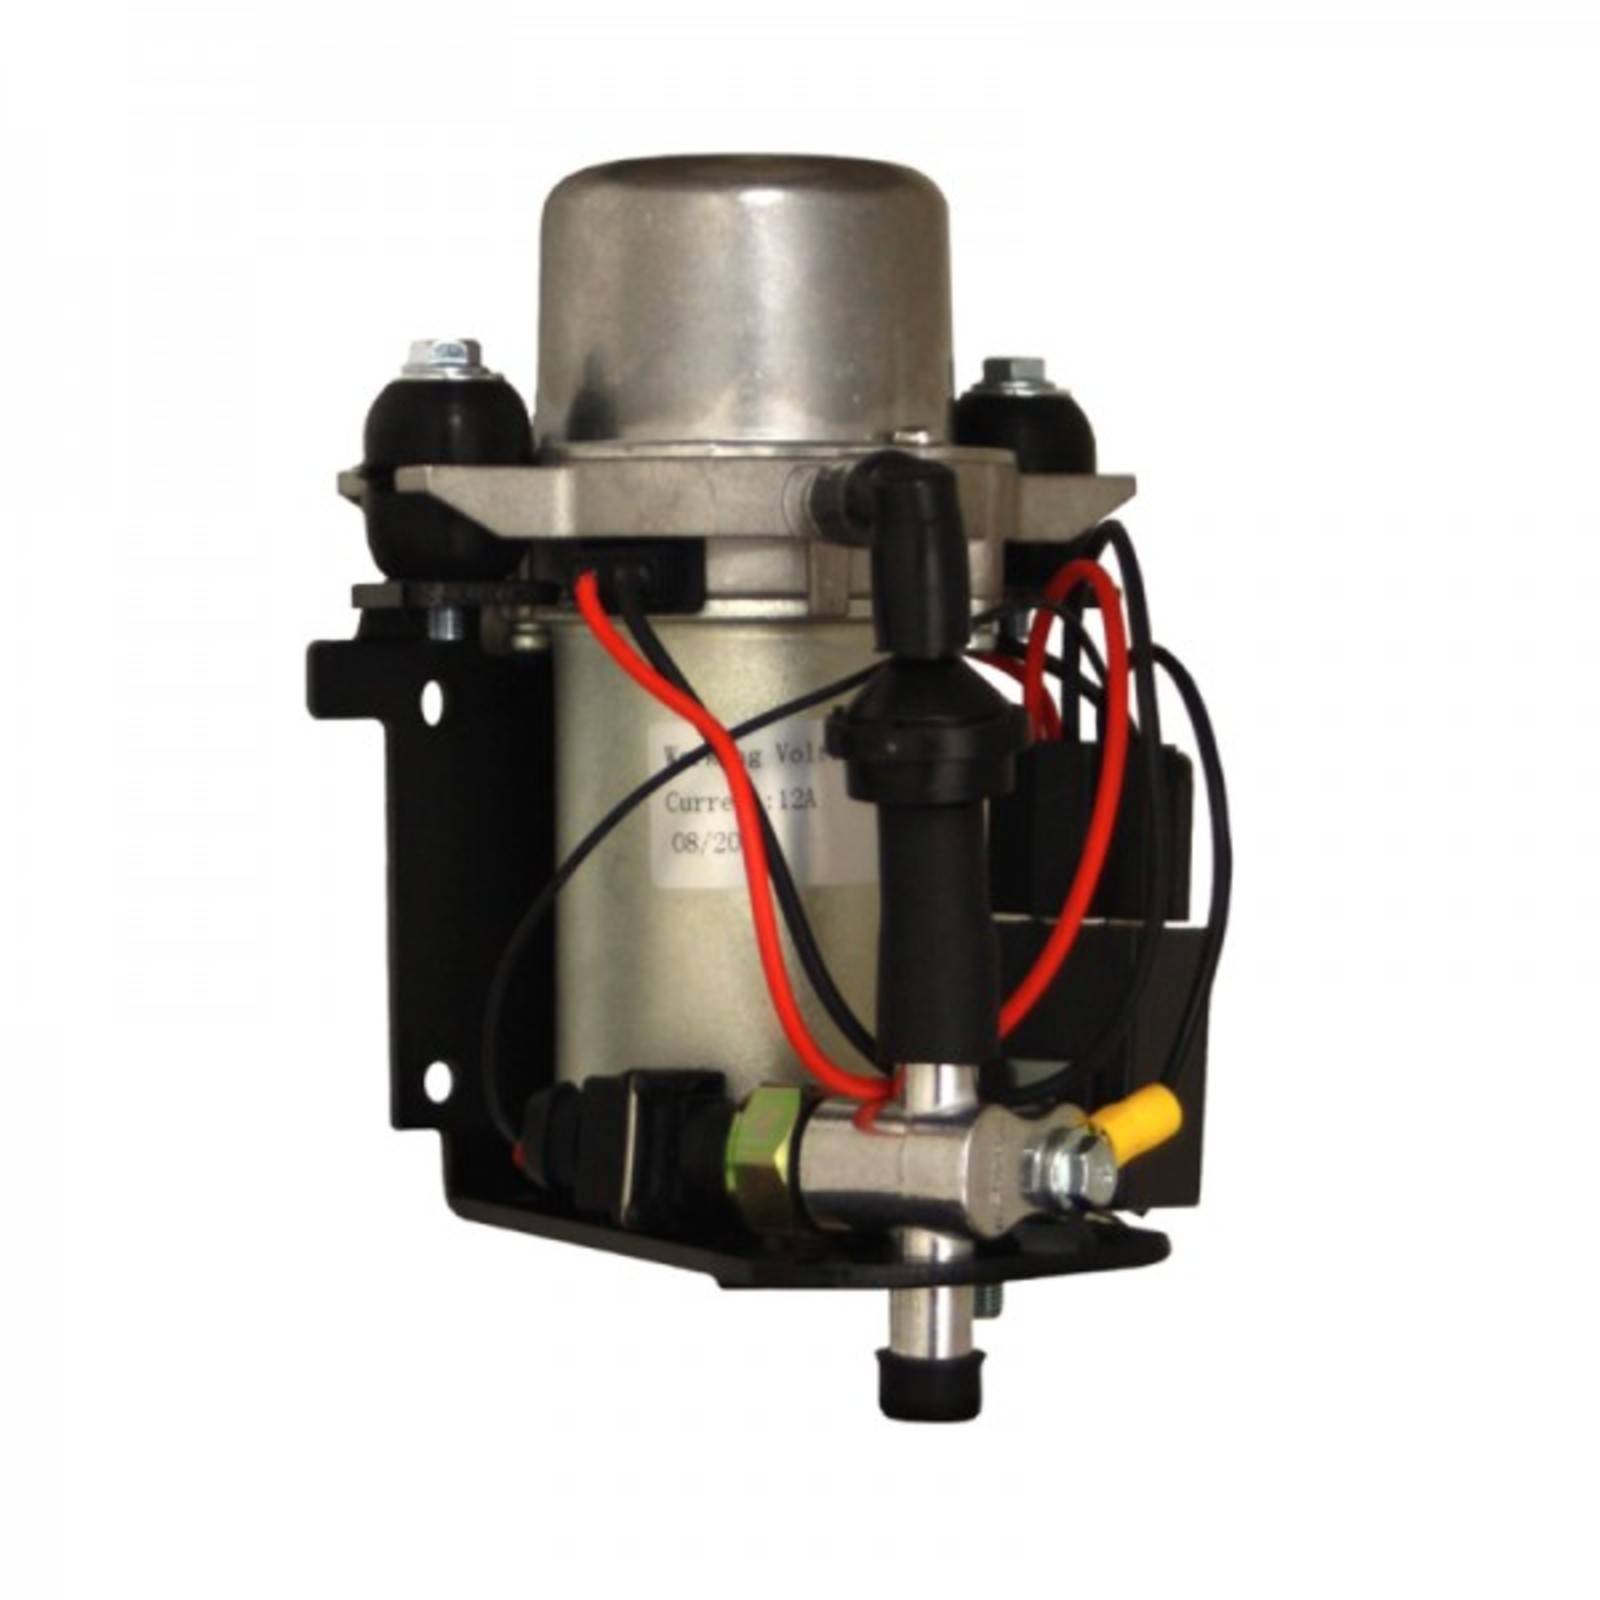 64-73 Canister Vacuum Pump Assembly